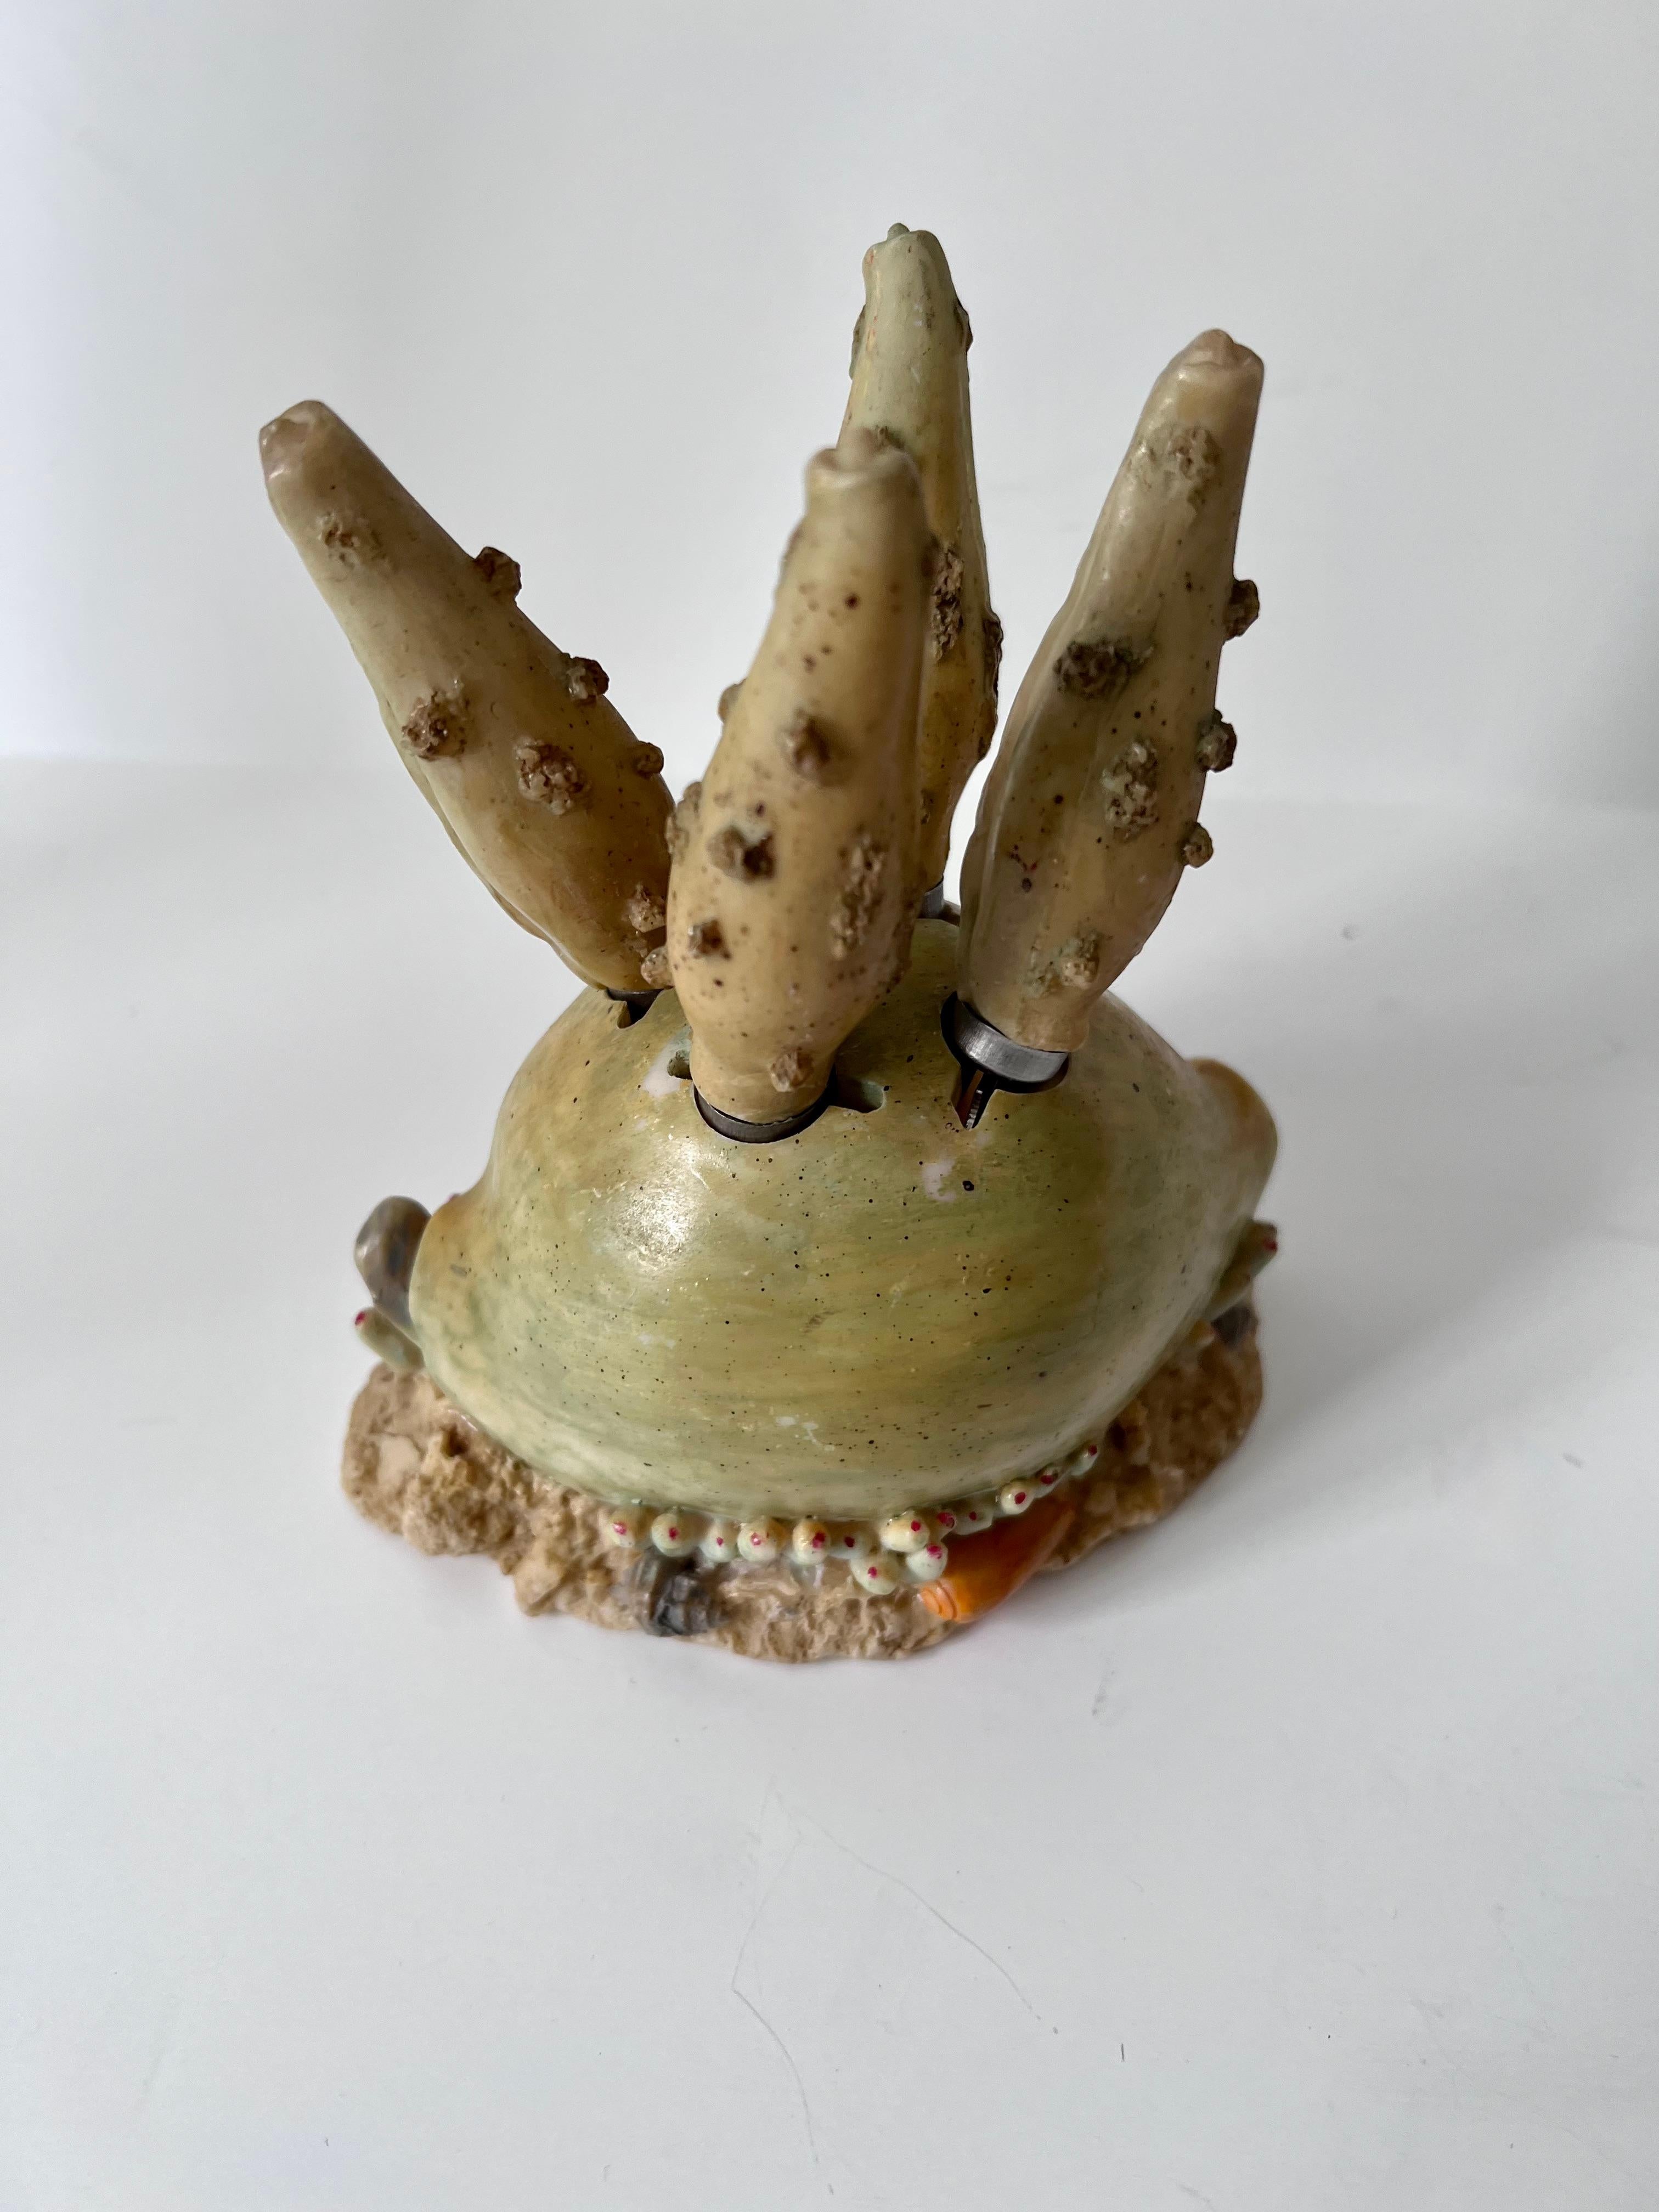 Recently acquired from Paris...A unique set of four cheese spreaders in a holder of a resin shell.  The four knives have a grotto look with the grotto holder.  A compliment to any cocktail table, bar or decorative piece in the kitchen.  